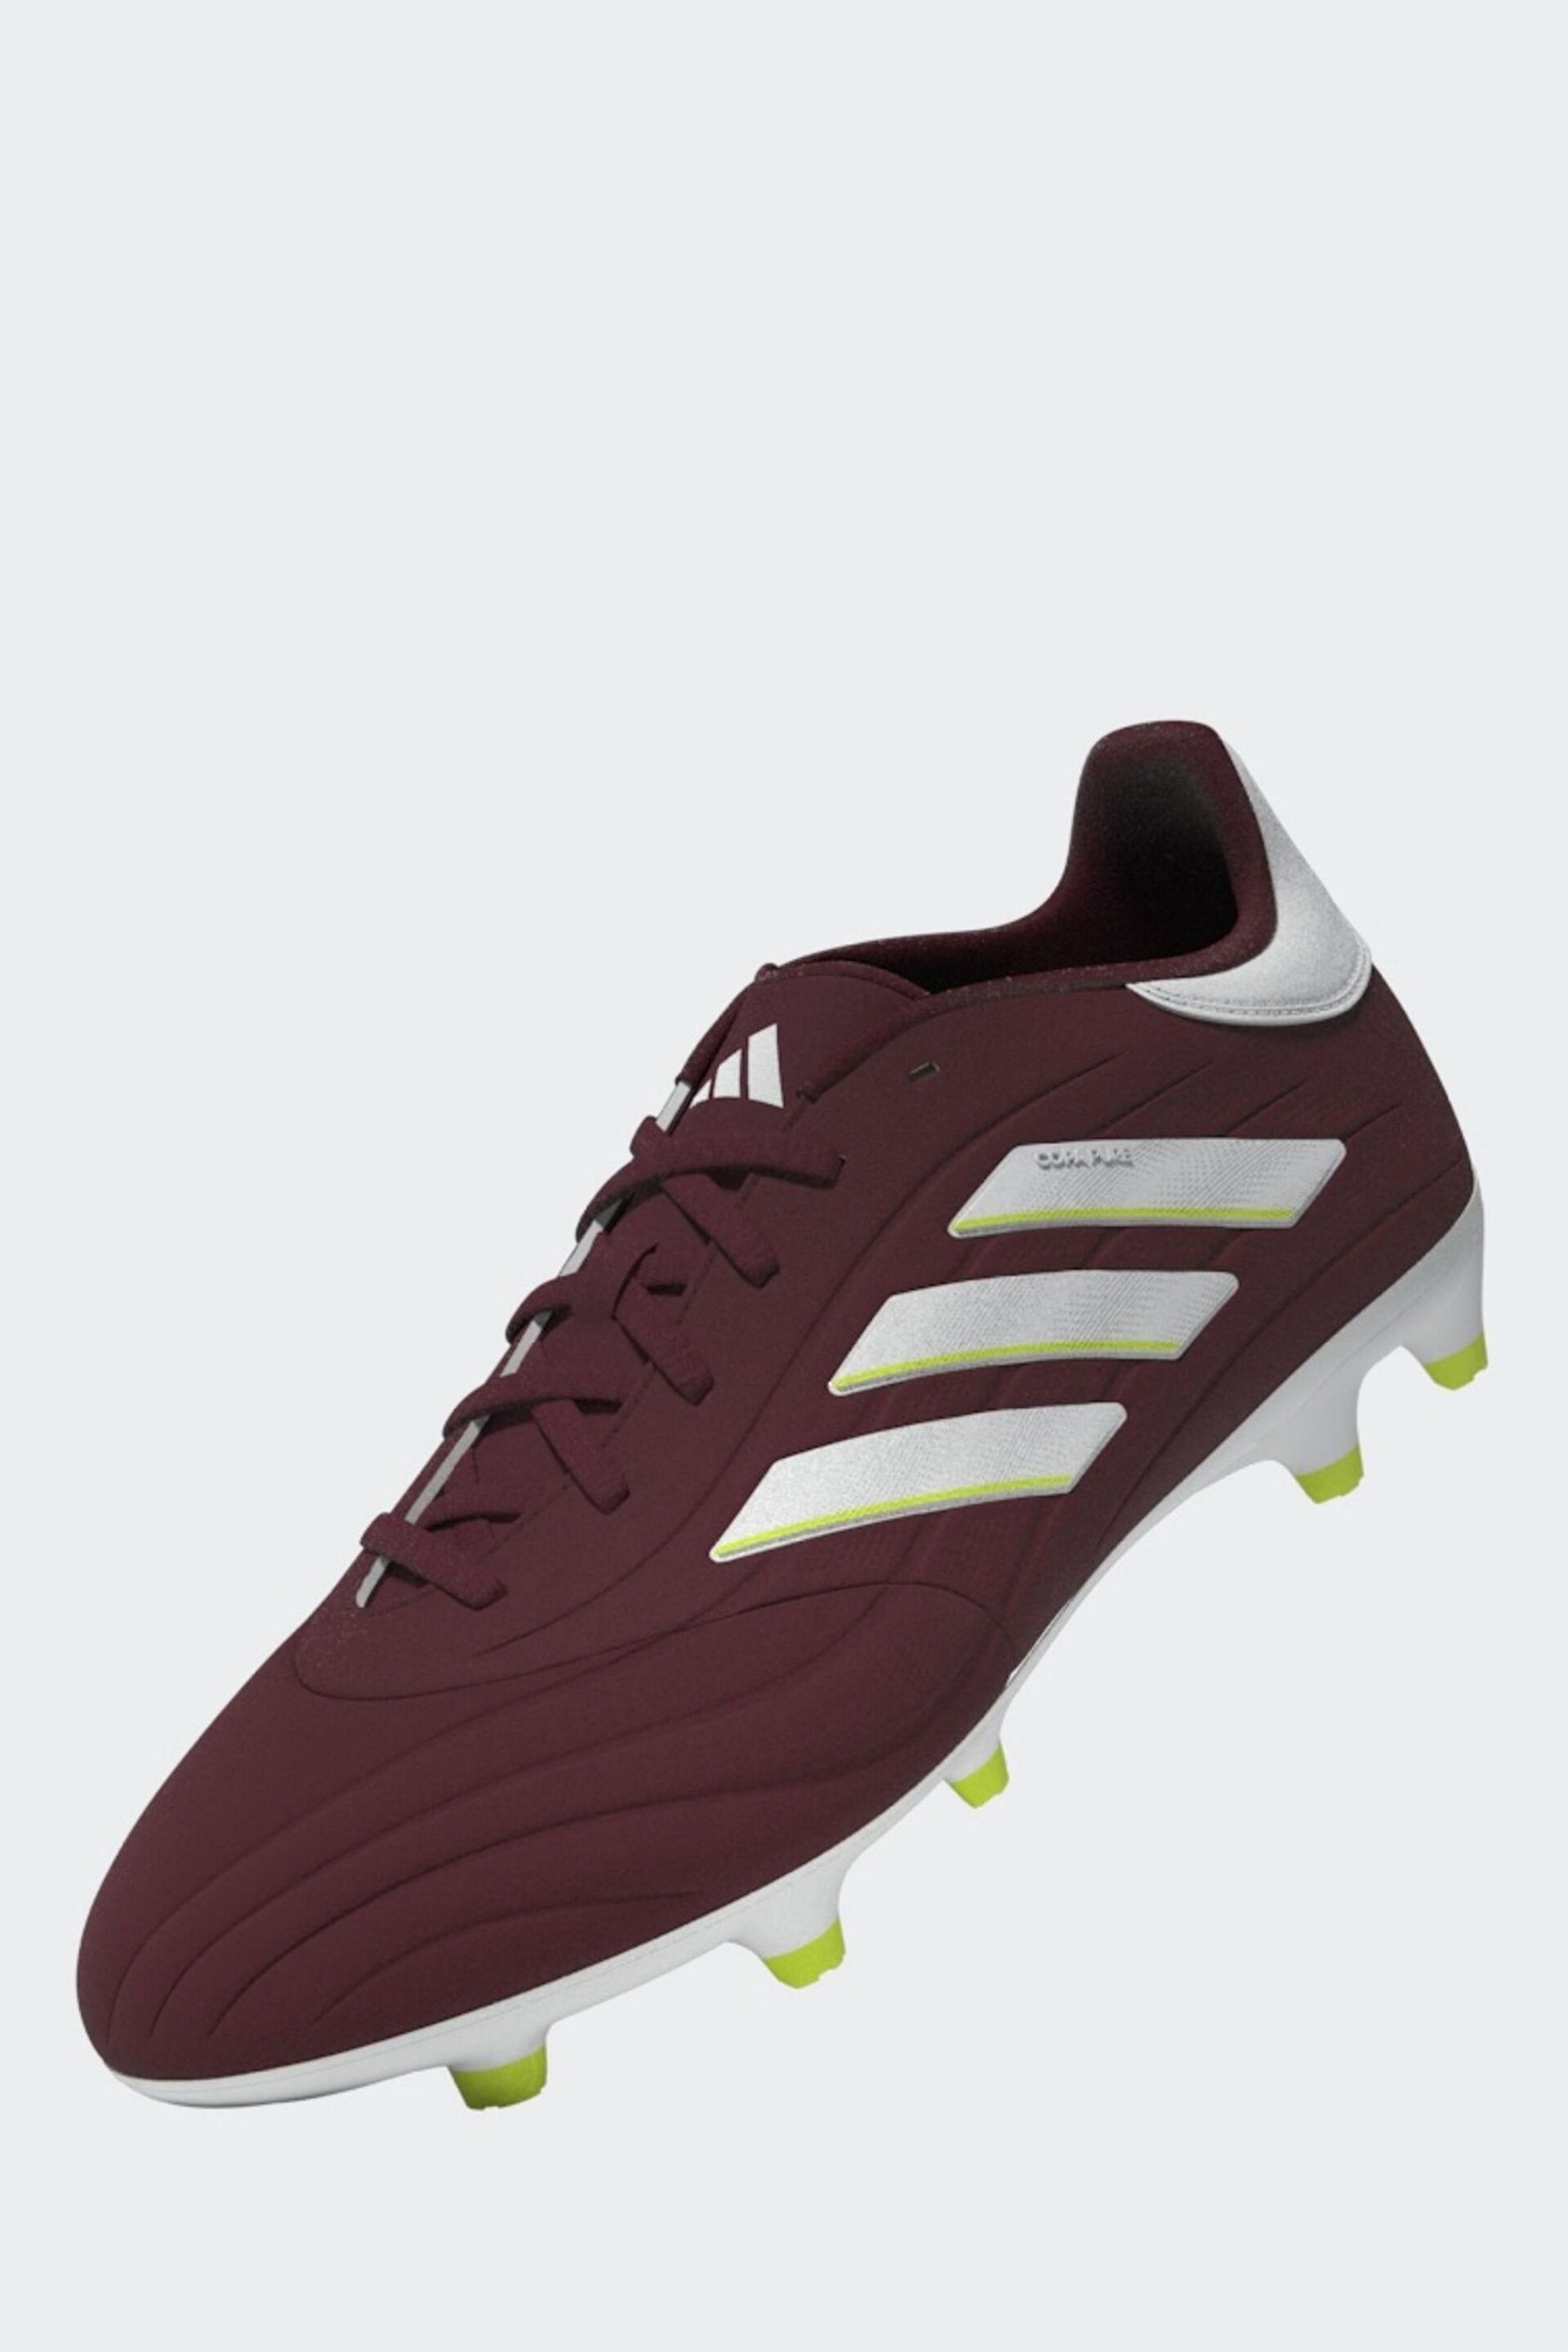 adidas Red/White Football Red/White Copa Pure II League Firm Ground Adult Boots - Image 10 of 22